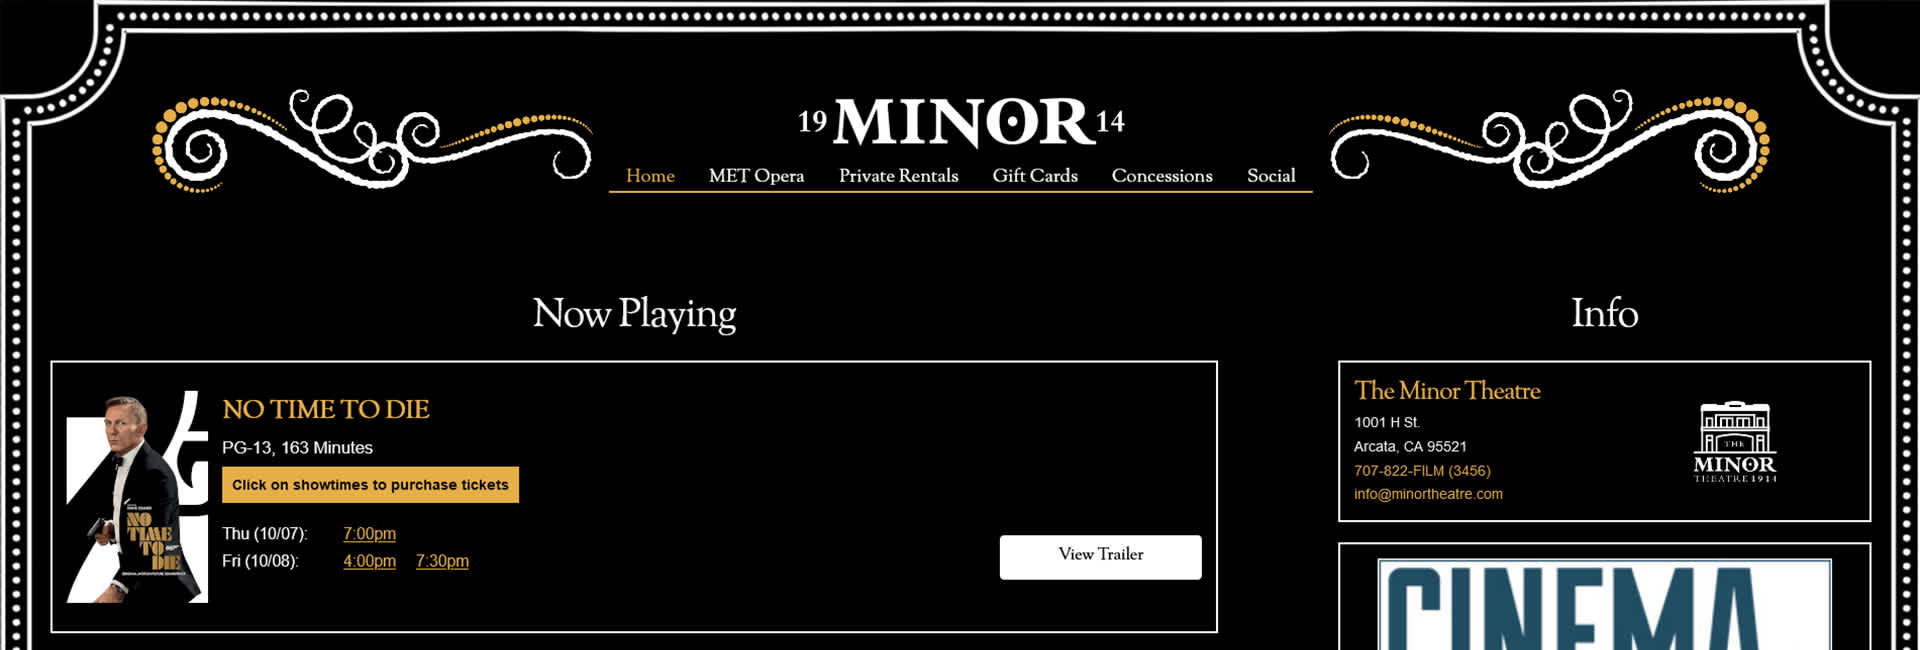 The Minor Theatre Website Project